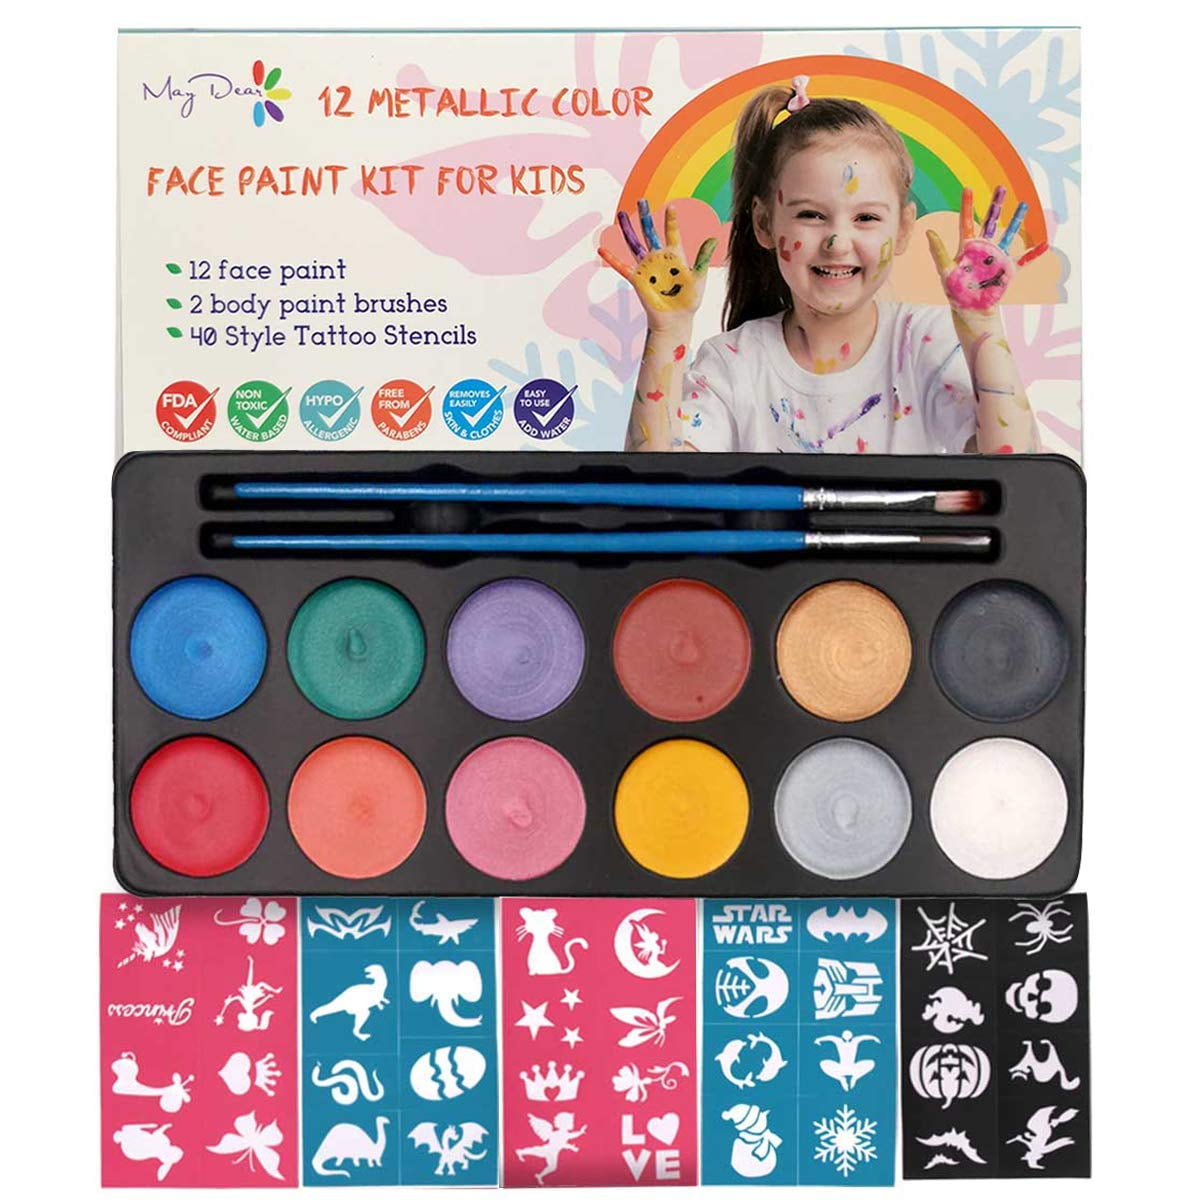 Face Paint Kit for Kids - Vibrant Face Painting Colors, Stencils & 2  Cosmetic Brushes - Video Tutorials & eBook - Fun, Easy to Use, Non-Toxic &  Safe 